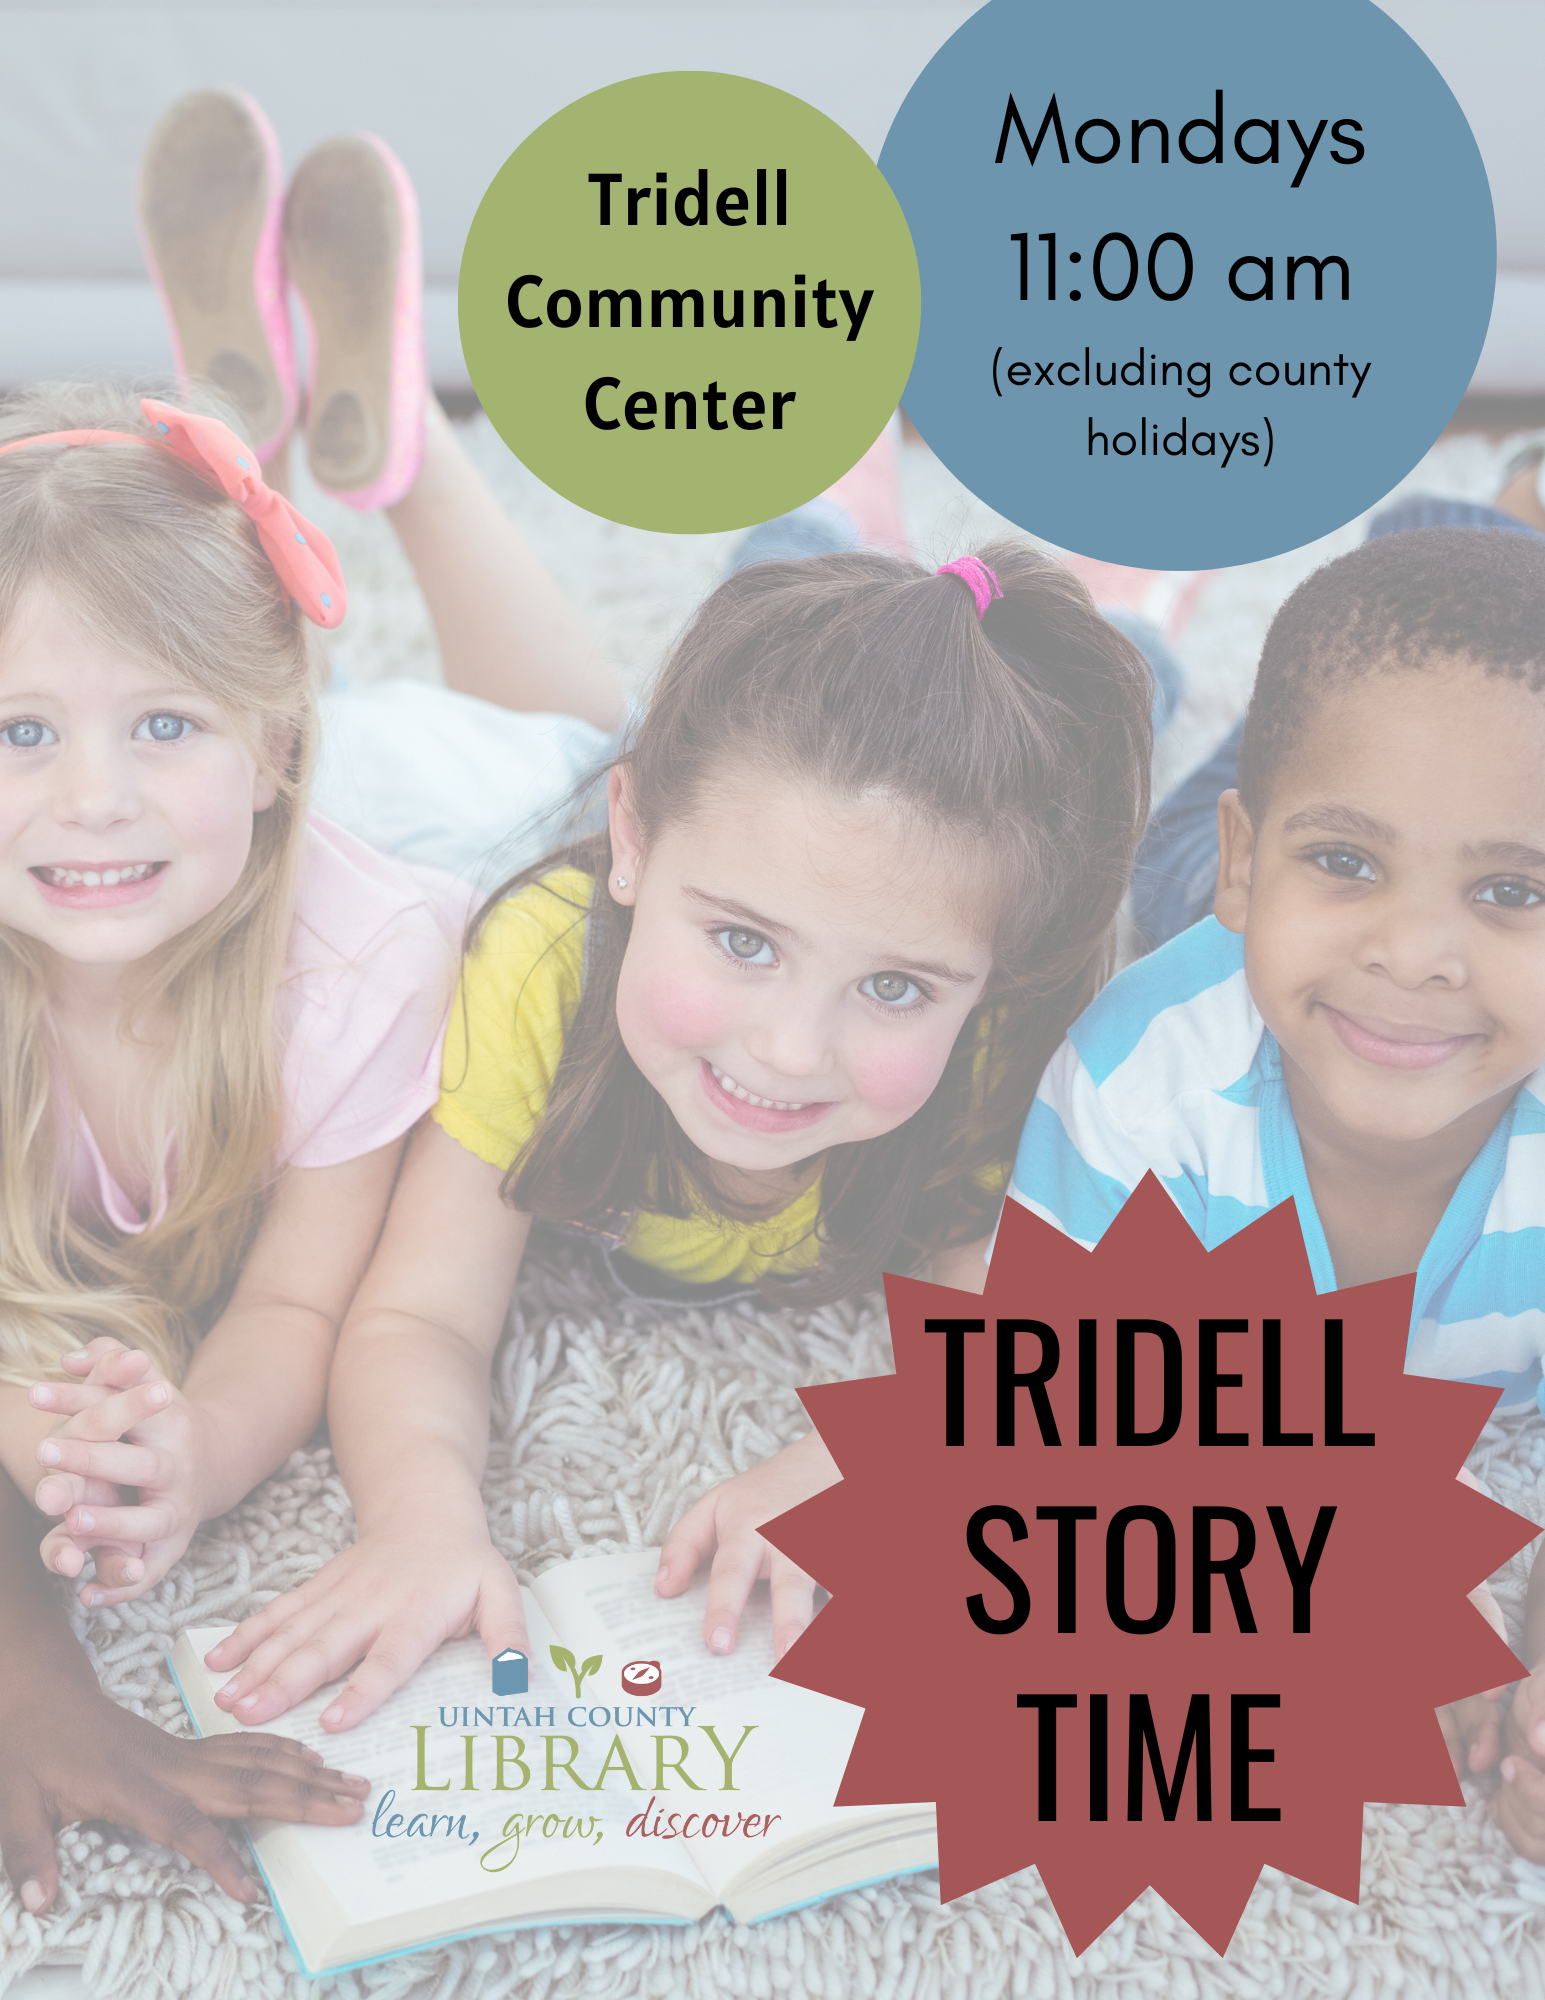 "Tridell Community Center | Mondays 11:00 a.m. (excluding county holidays) | Tridell Story Time"